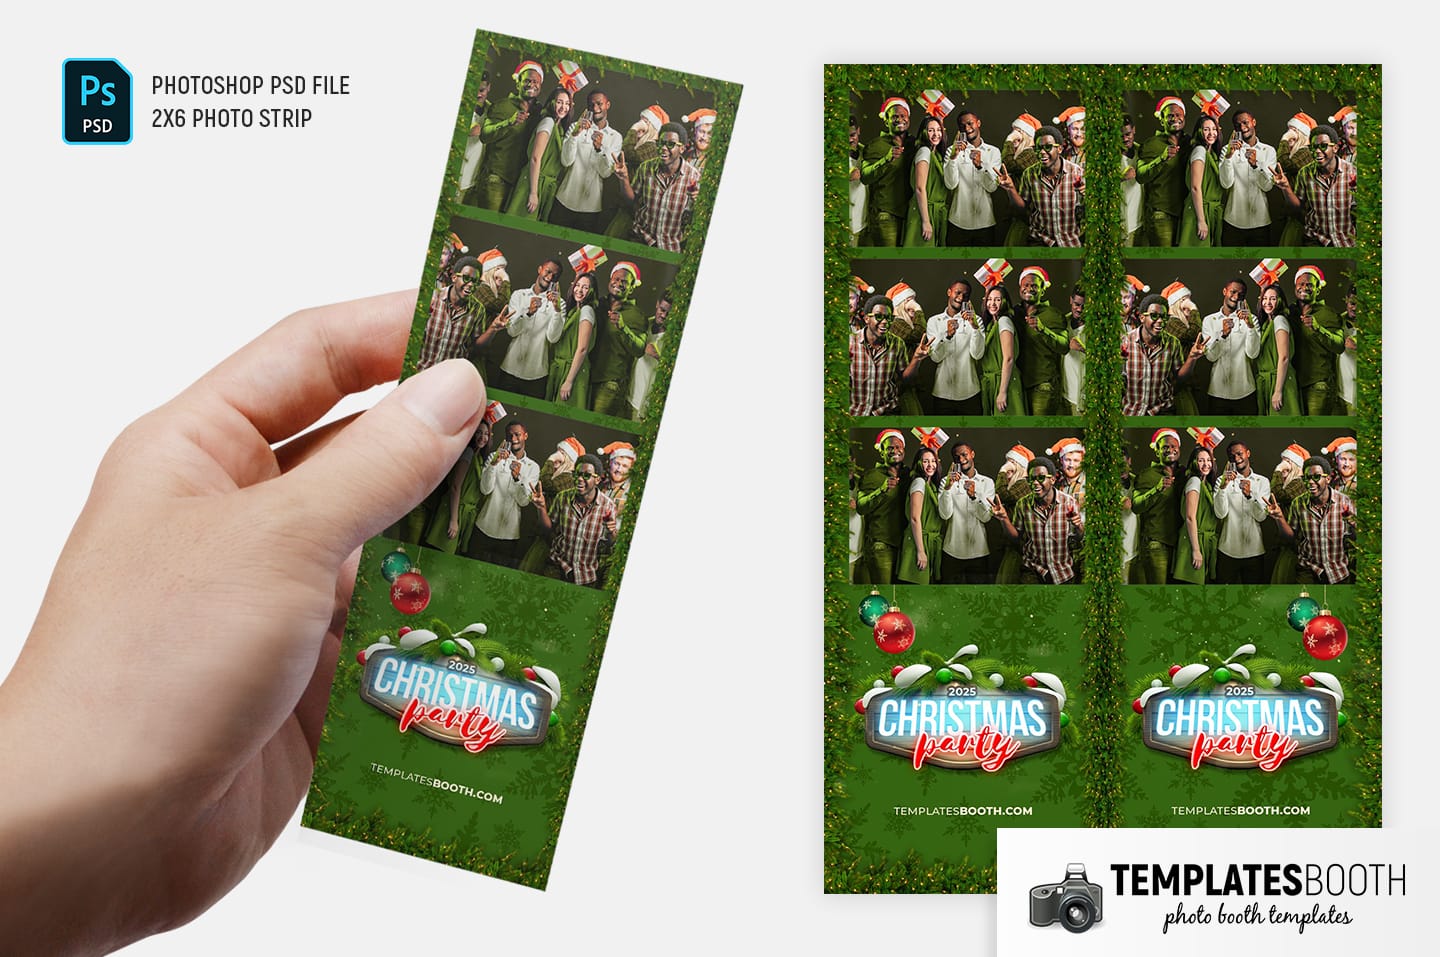 Green Christmas Photo Booth Template (2x6 photo strip)